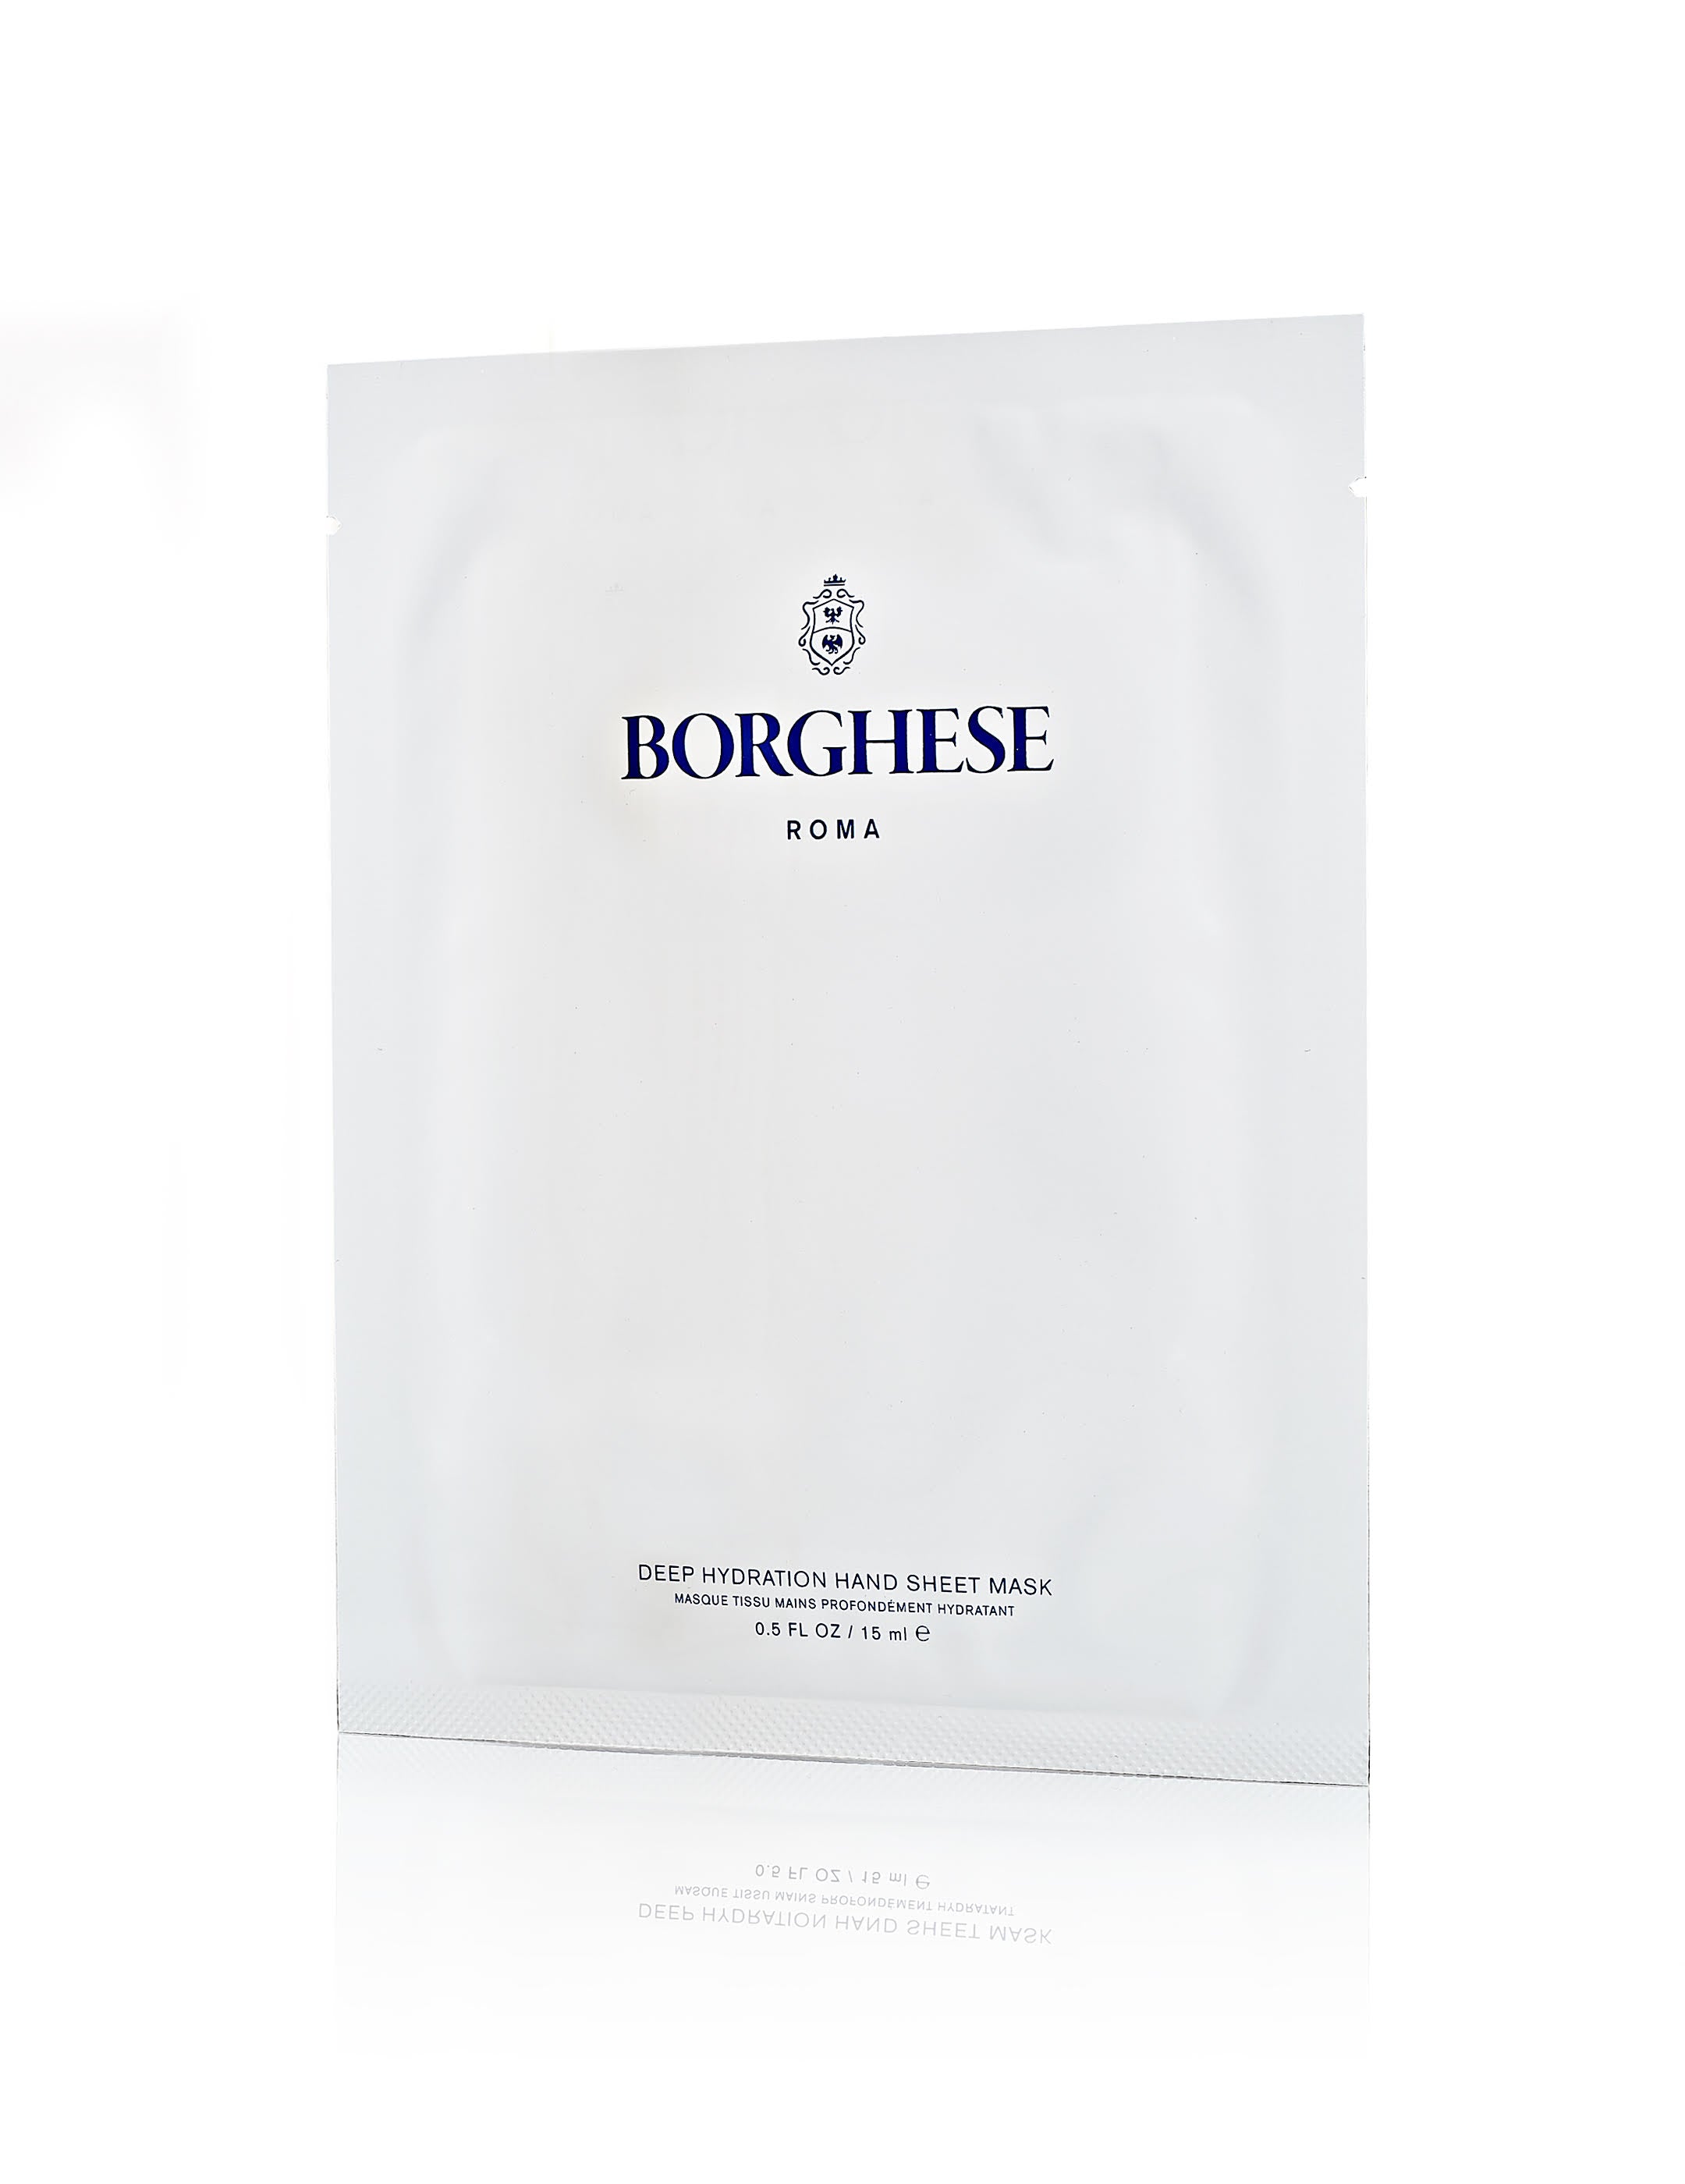 This is a picture of the Borghese Hand Sheet Mask Packette